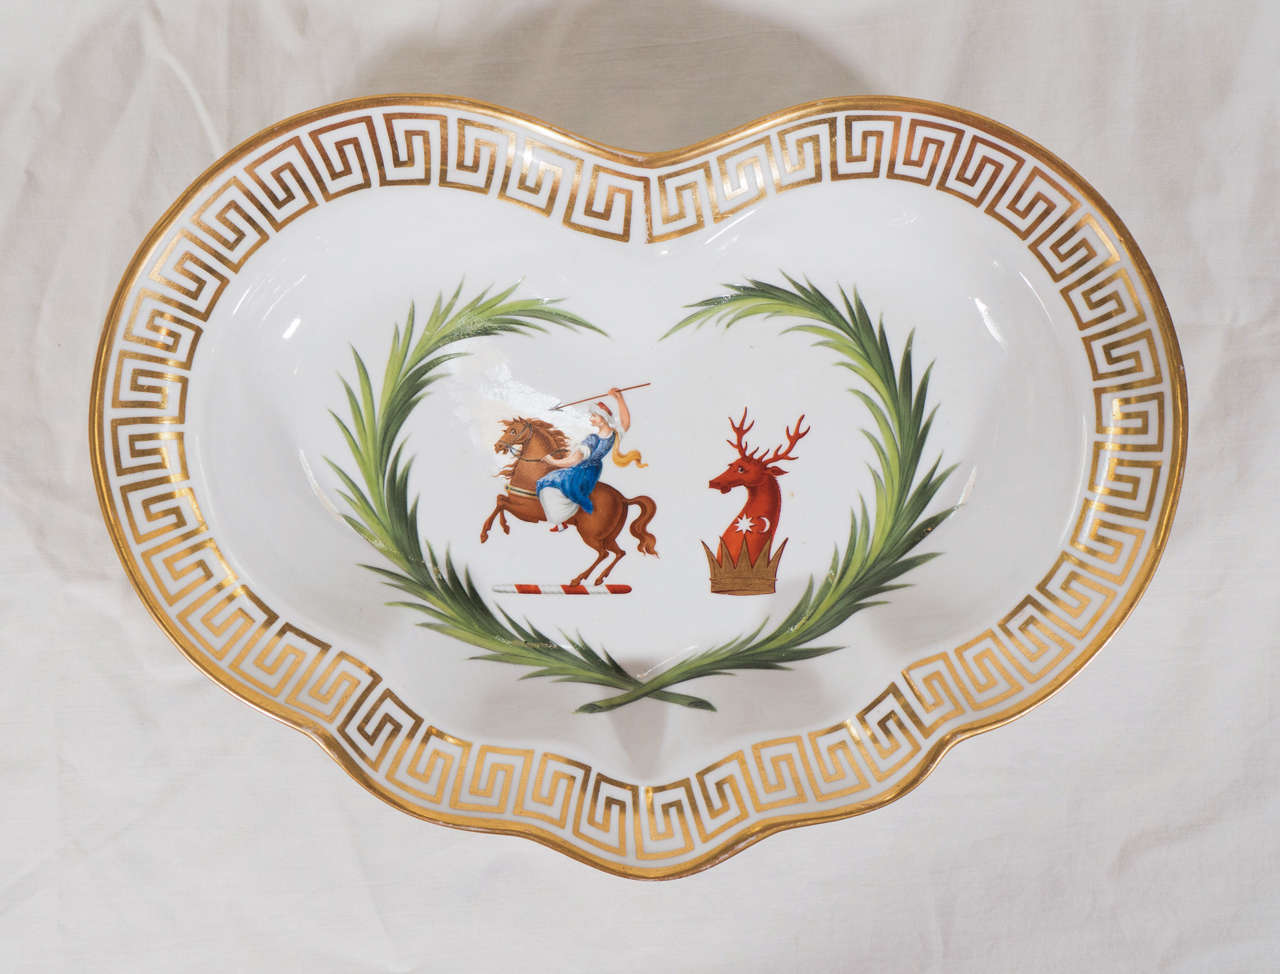 A pair of Chamberlain's Worcester heart-shaped dishes with a bold design showing the large double crest of General Sir John Doyle, Baronet of the Island of Guernsey framed within a victor's laurel wreath. The armorial is beautifully bordered with a